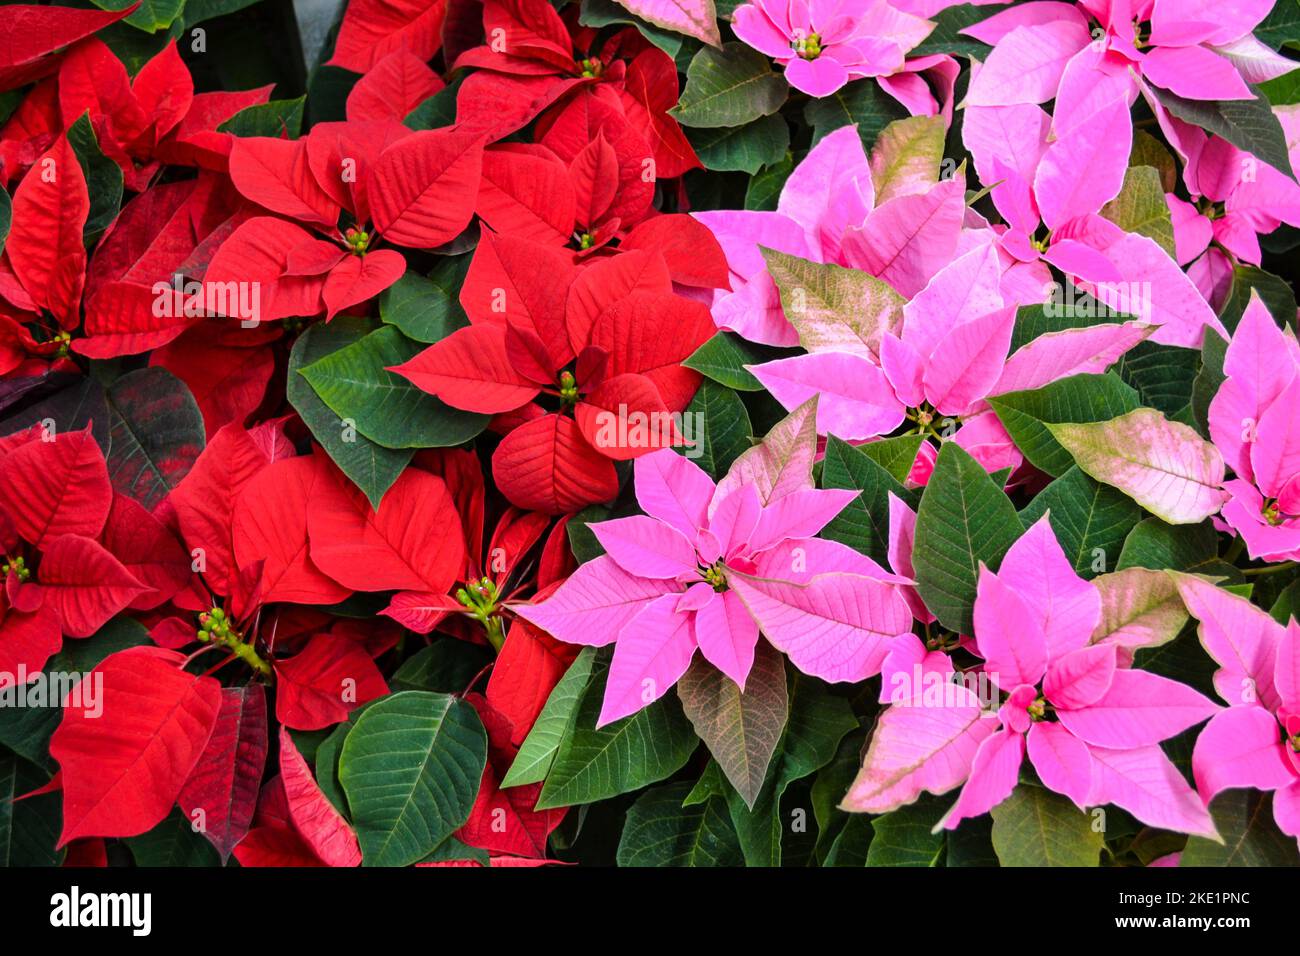 The bright red and pink flowers of poinsettia, otherwise called the Christmas star, with dark green leaves. In large numbers as a festive background Stock Photo